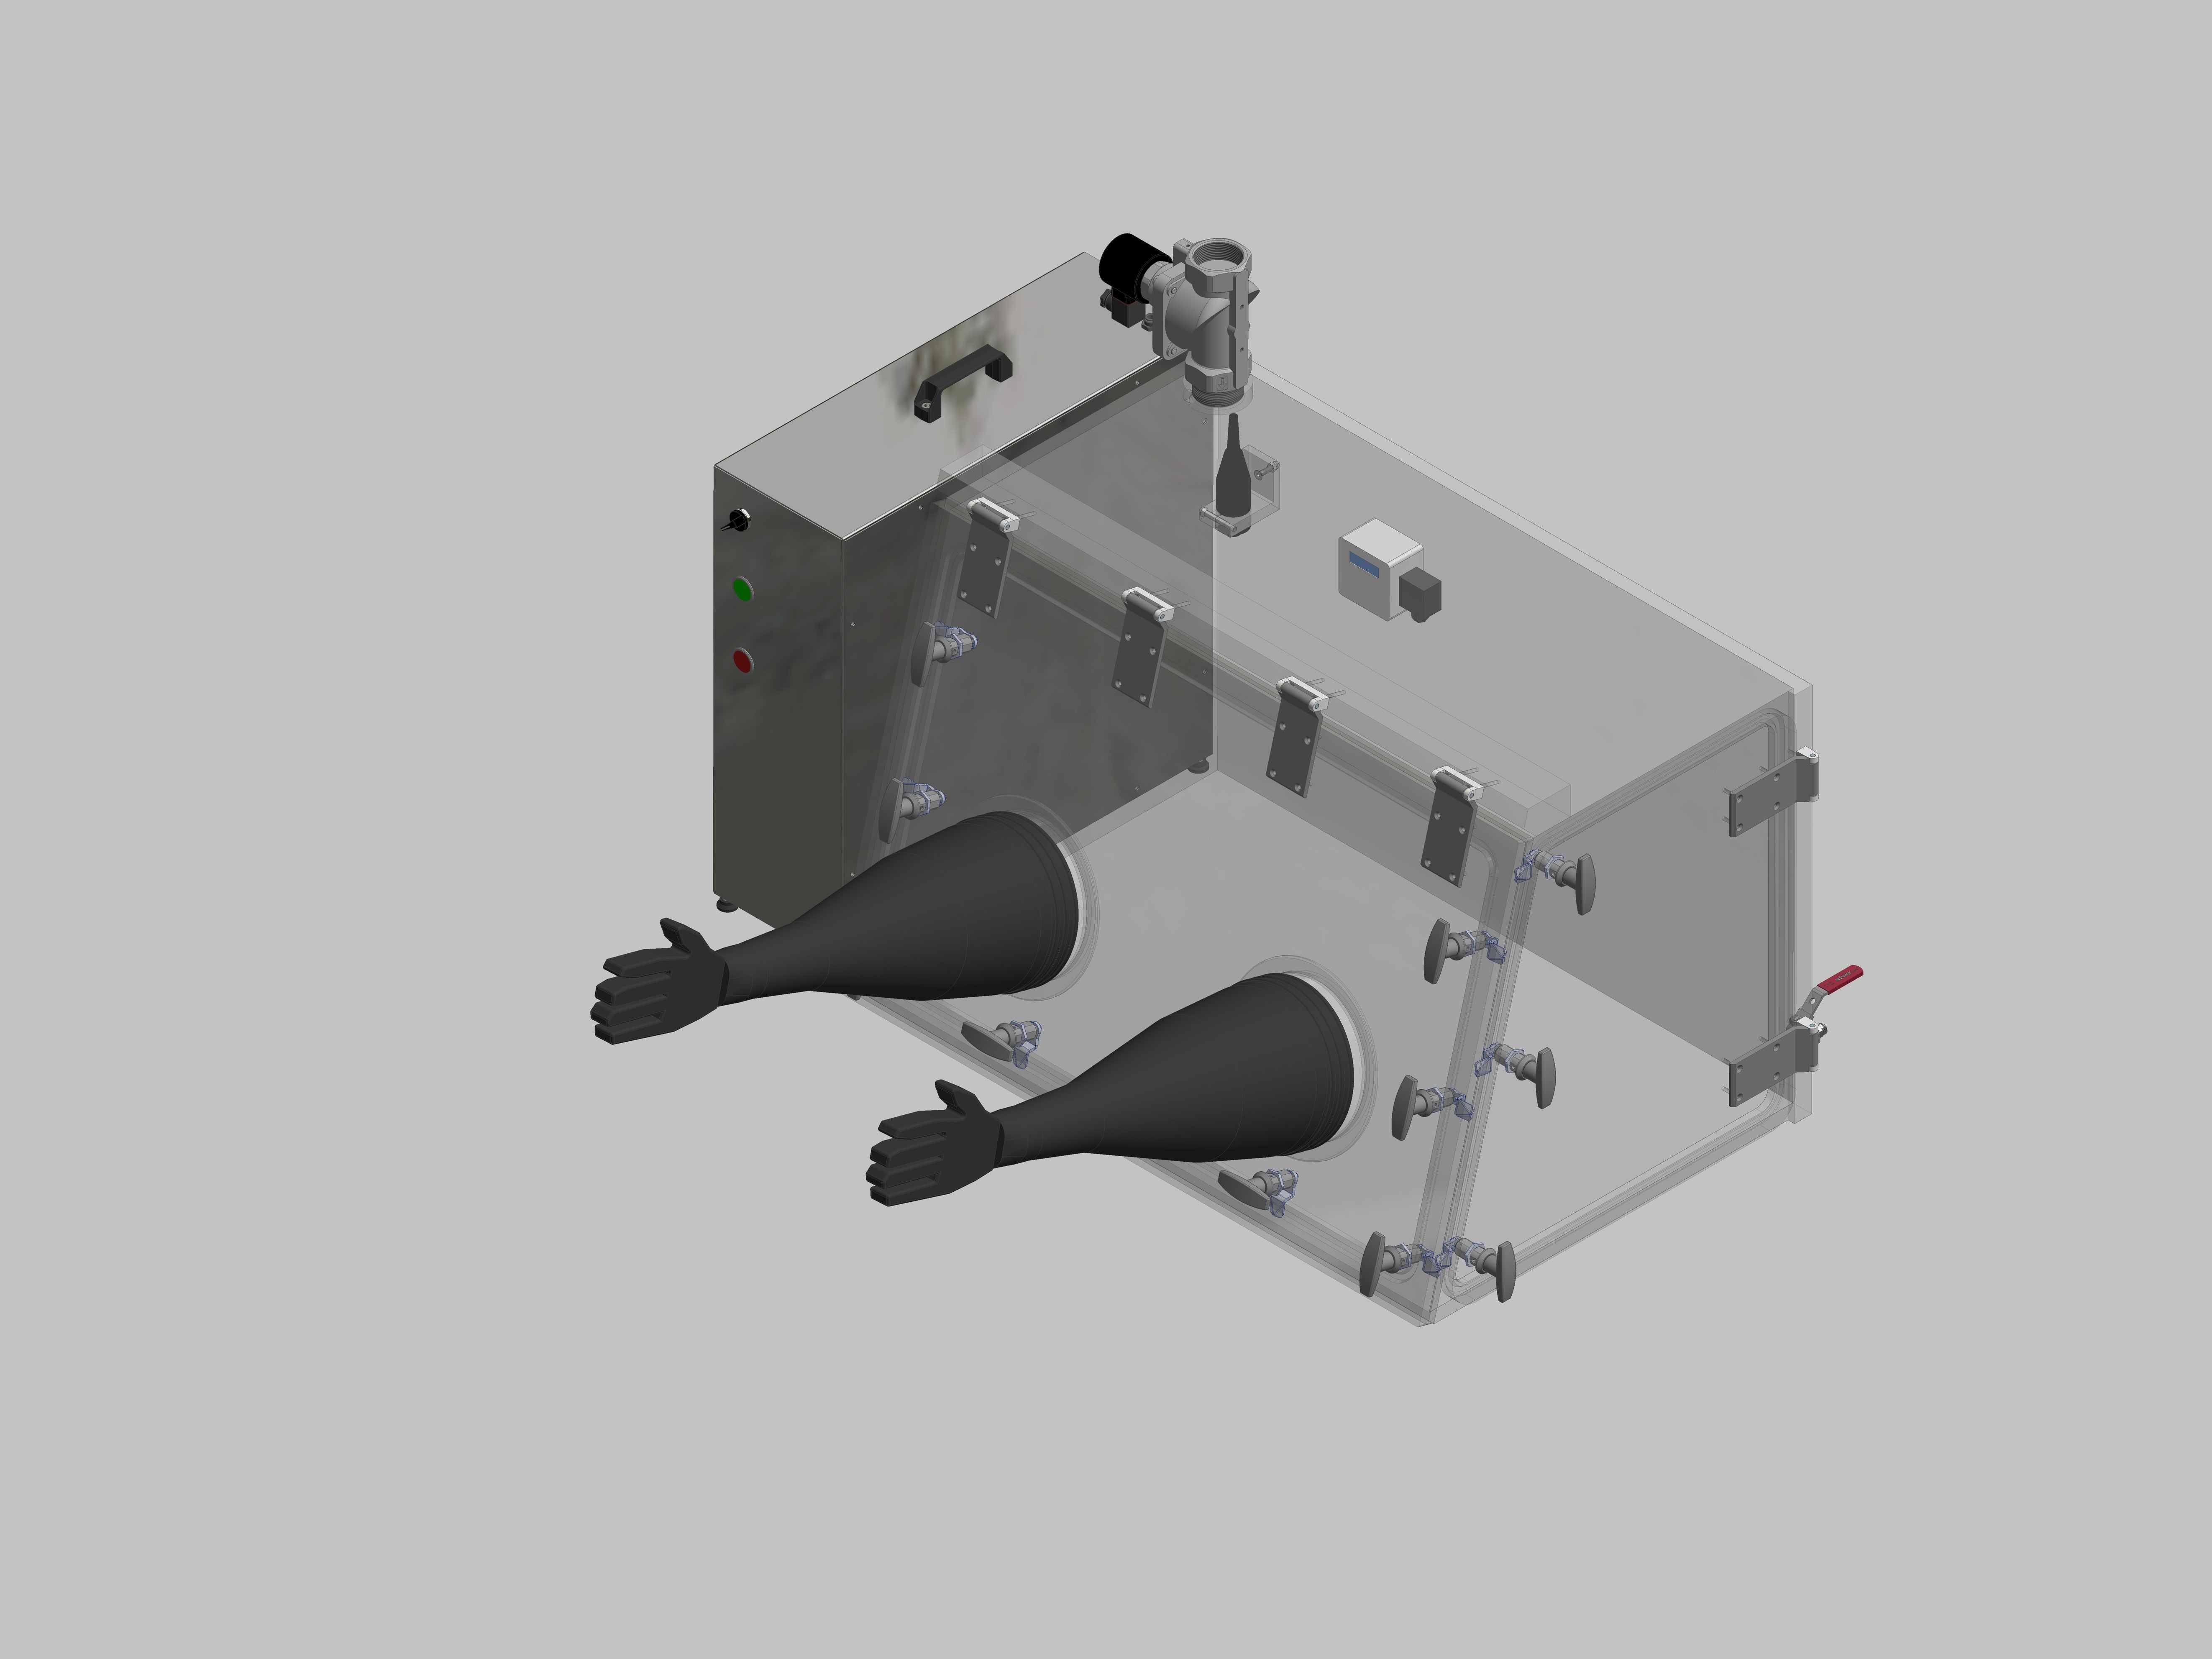 Glovebox made of acrylic &gt; Gas filling: automatic flushing with pressure control, front version: swivels upwards, side version: hinged doors, control: oxygen regulator